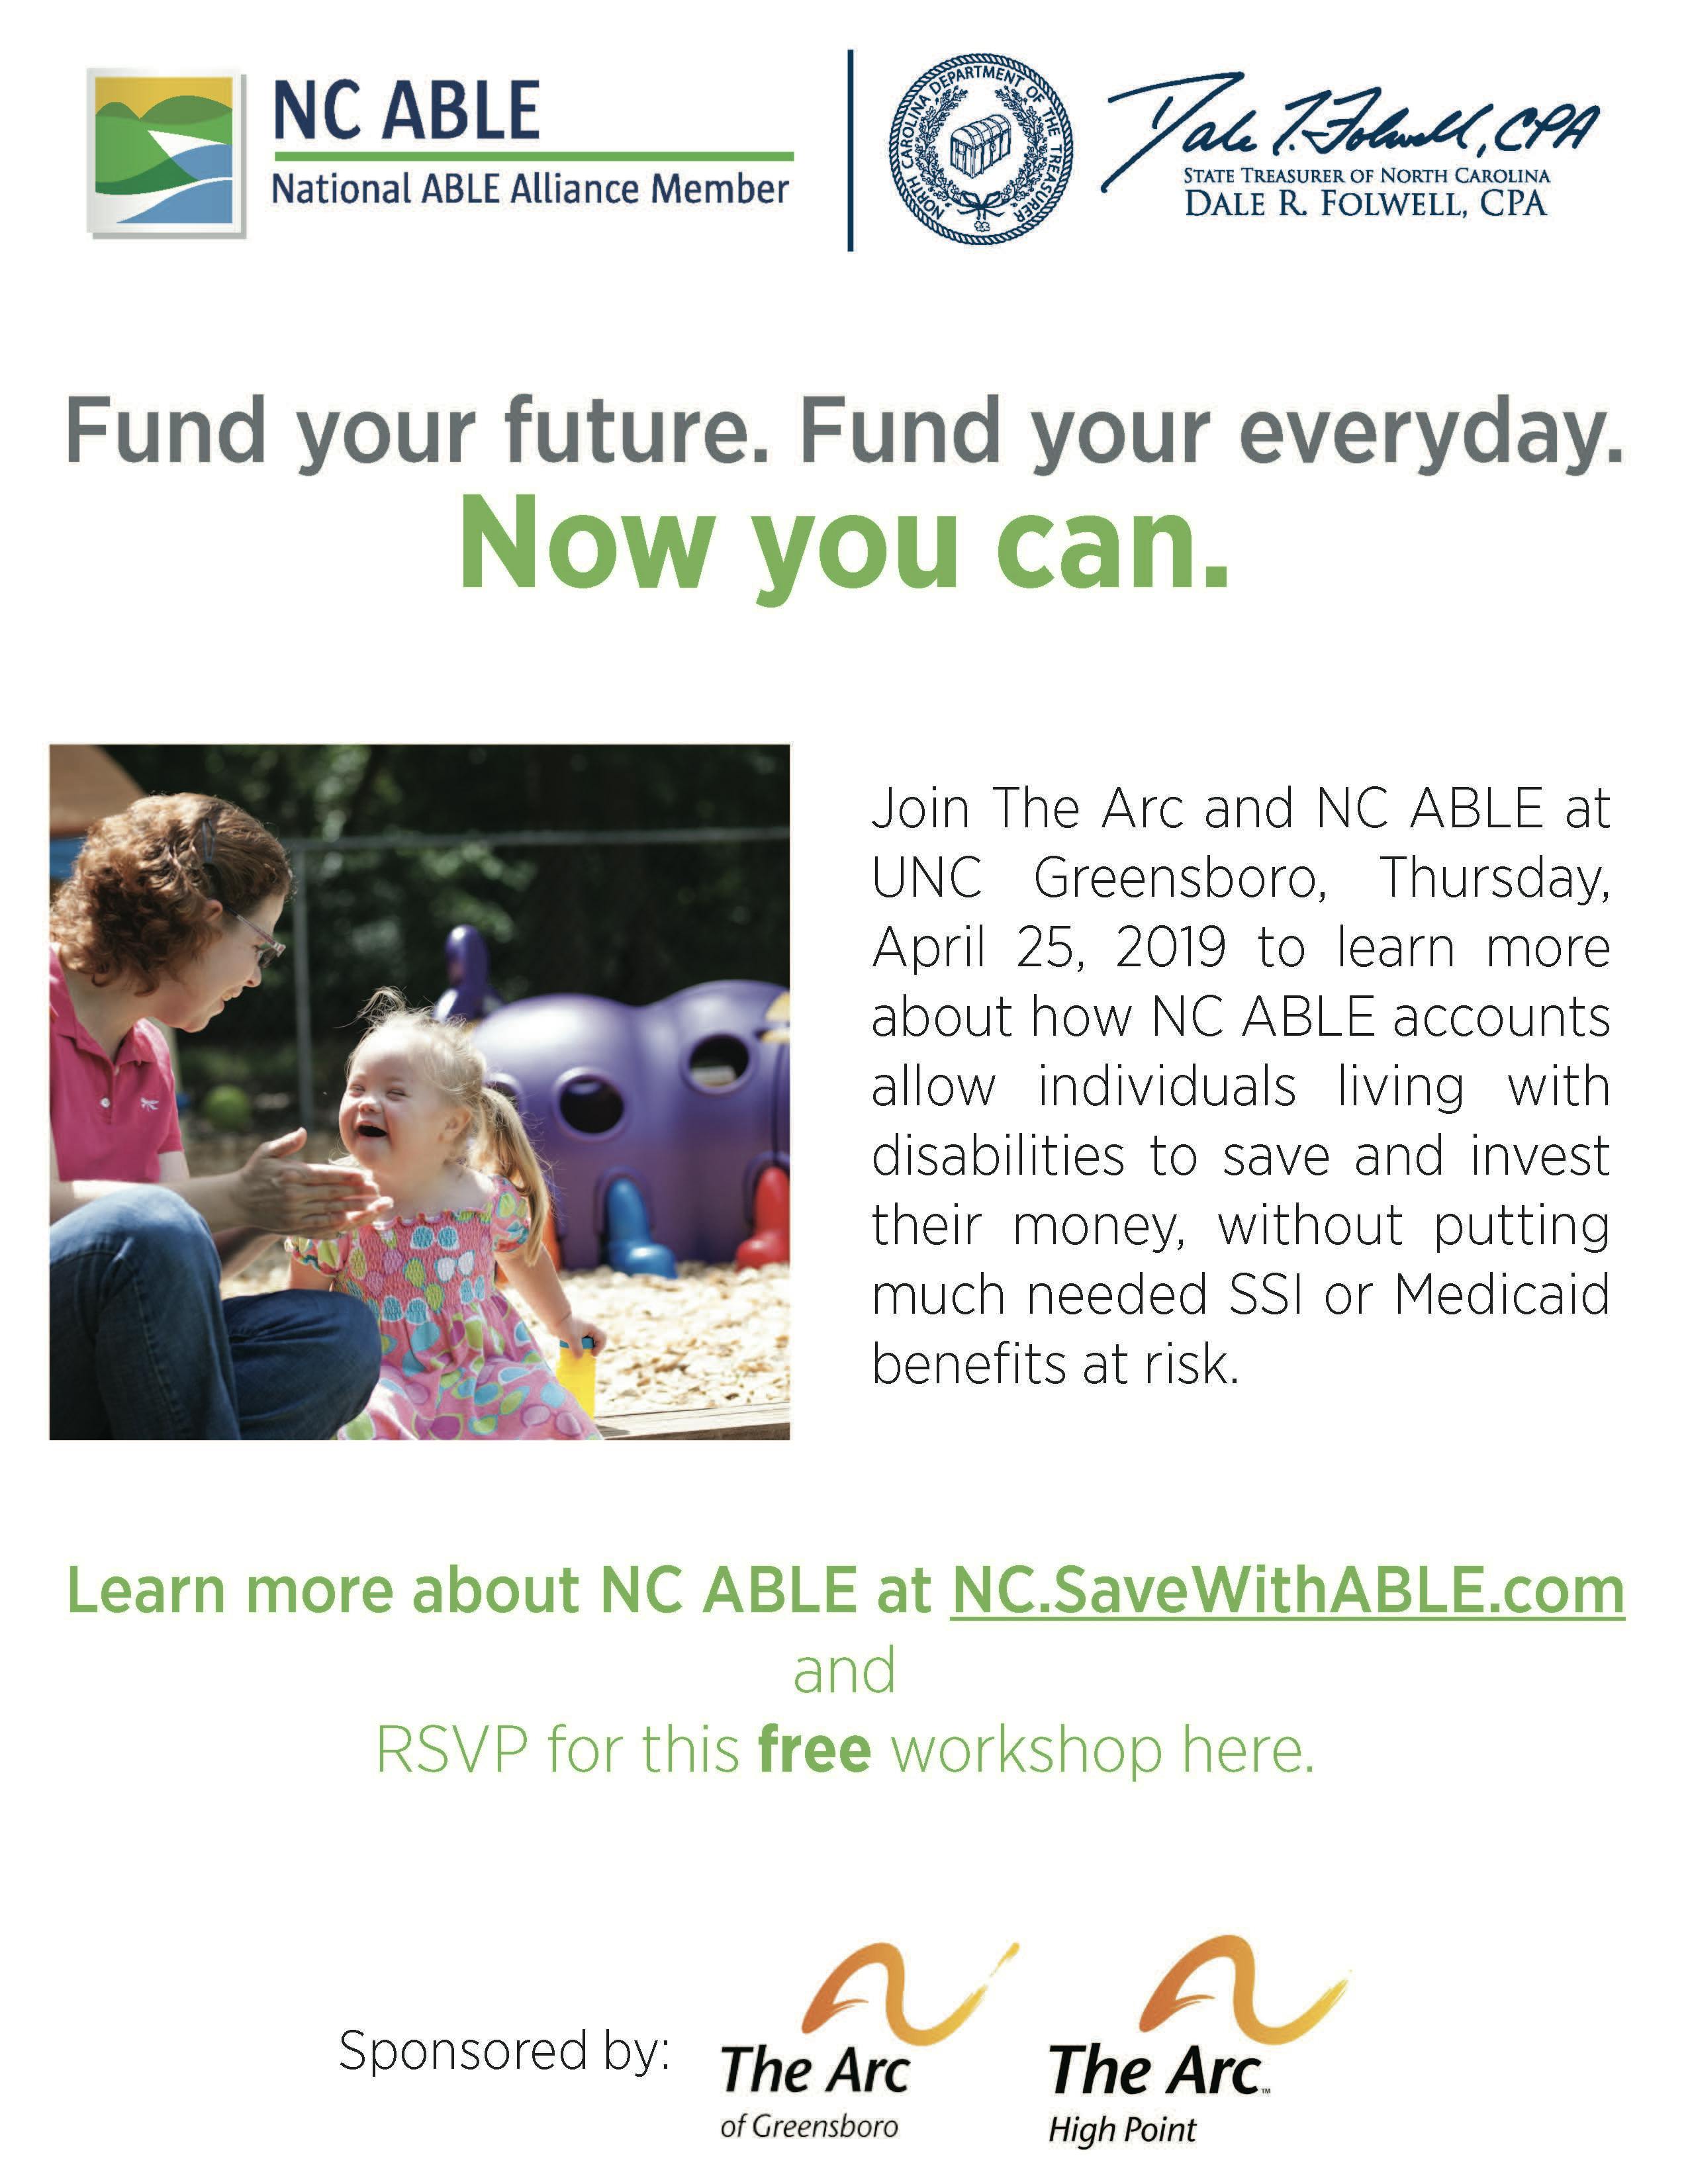 North Carolina ABLE Accounts - What You Need To Know